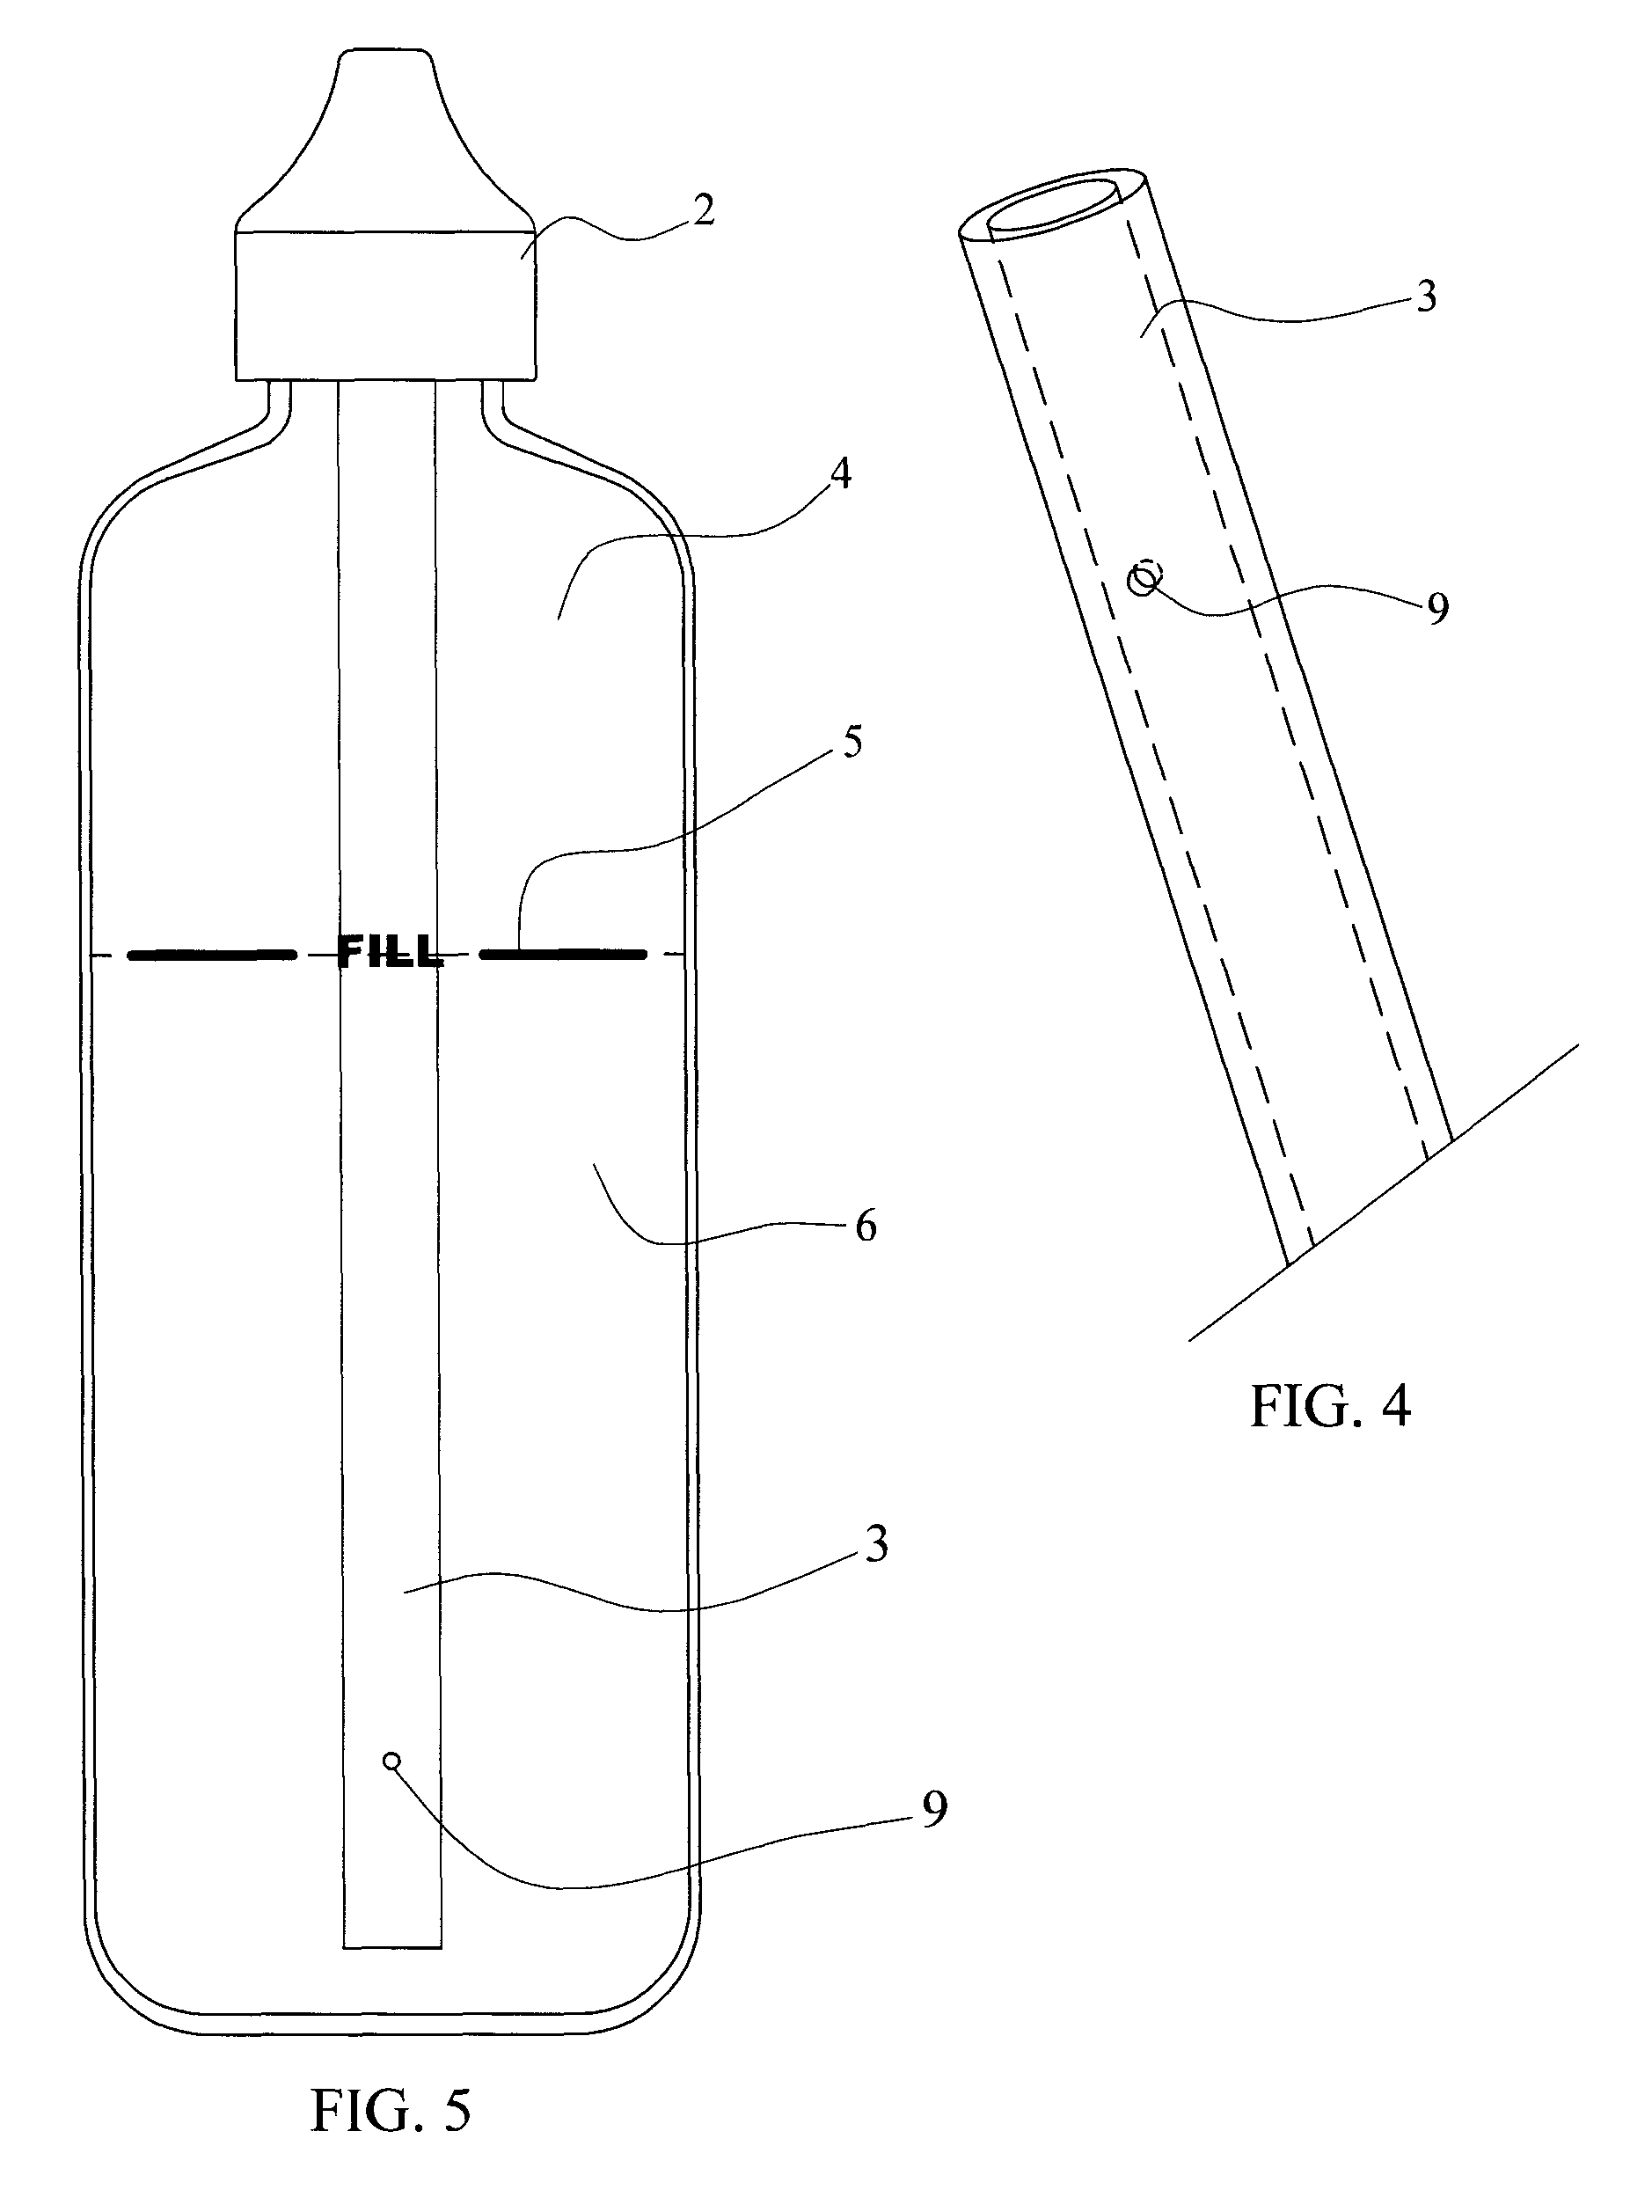 High flow volume nasal irrigation device and method for alternating pulsatile and continuous fluid flow